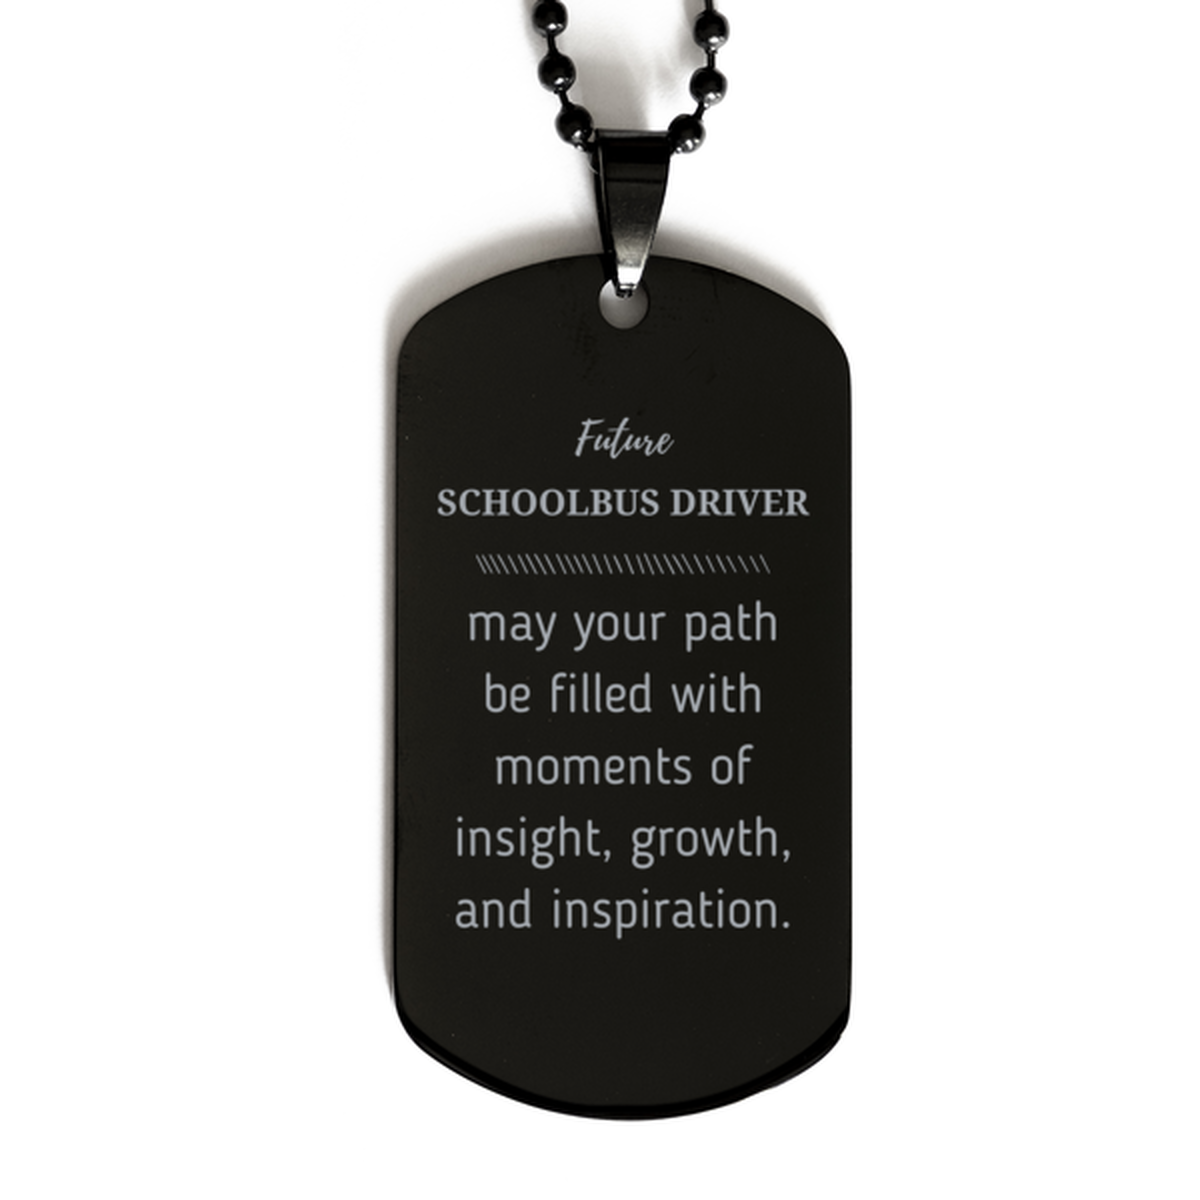 Future Schoolbus Driver Gifts, May your path be filled with moments of insight, Graduation Gifts for New Schoolbus Driver, Christmas Unique Black Dog Tag For Men, Women, Friends